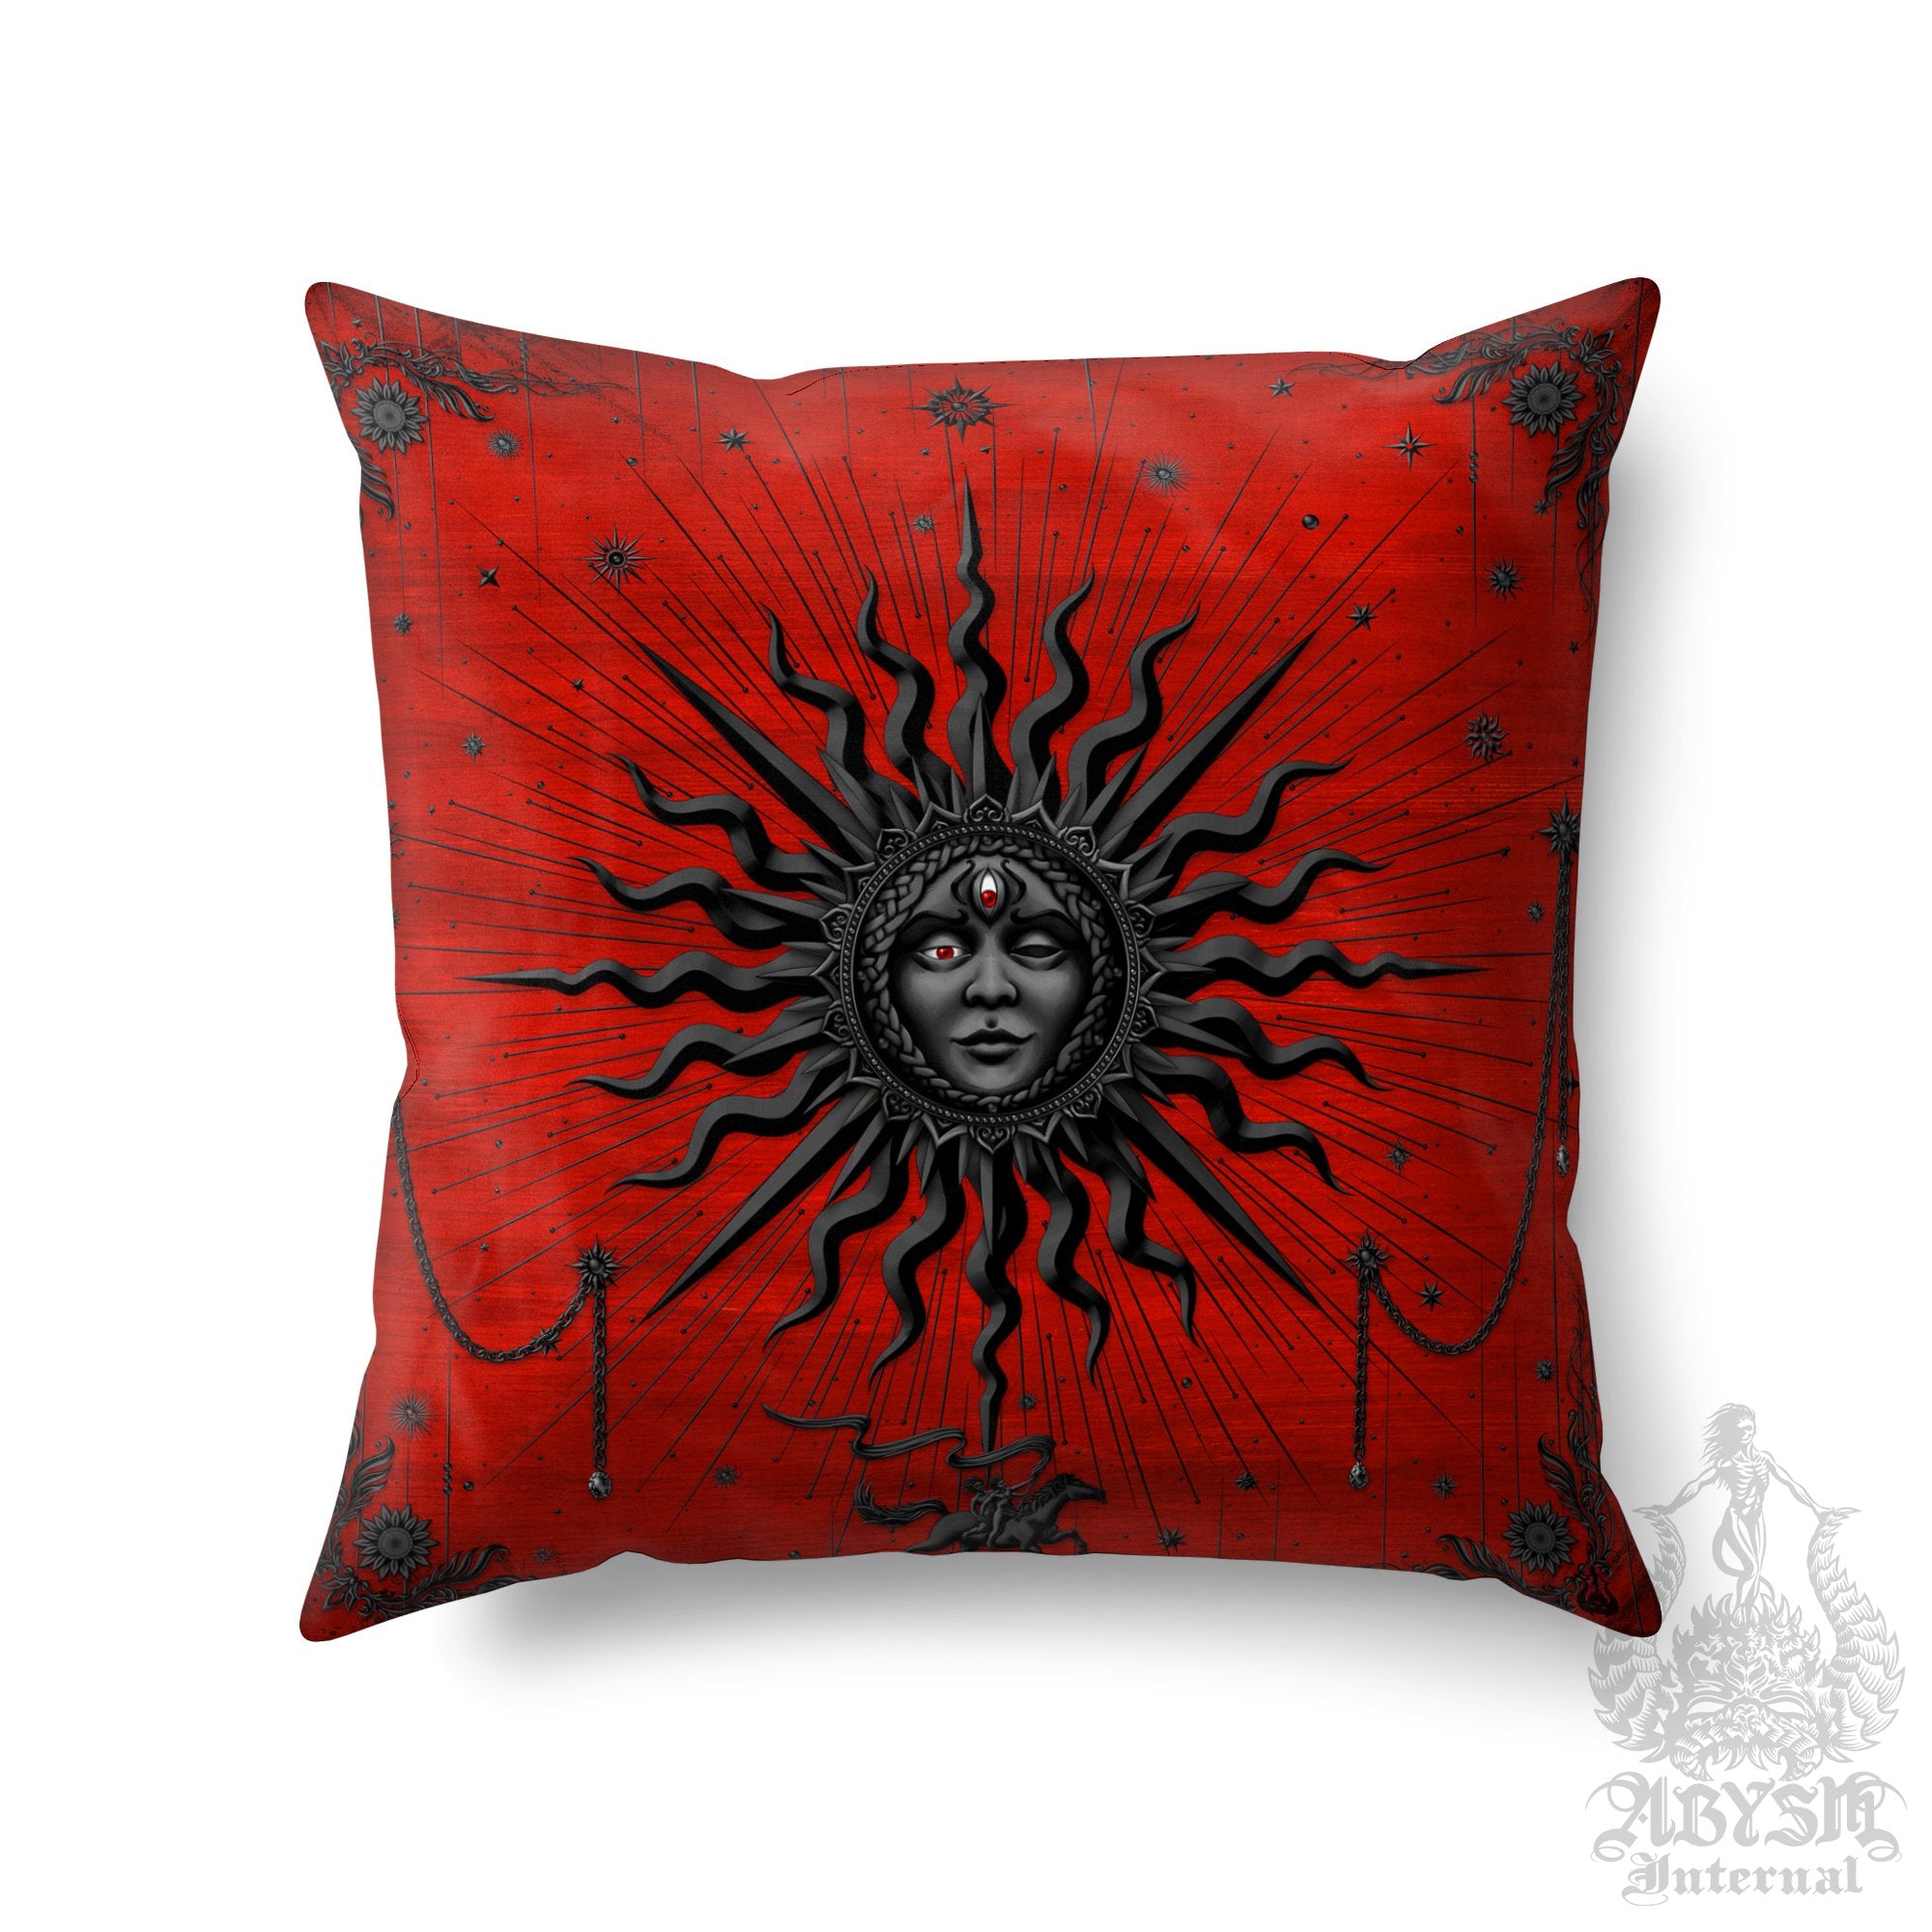 Bloody Gothic Throw Pillow, Goth Decorative Accent Pillow, Witchy Square Cushion Cover, Black Sun, Arcana Tarot Art, Alternative Home, Witch, Fortune & Magic Room Decor - Abysm Internal